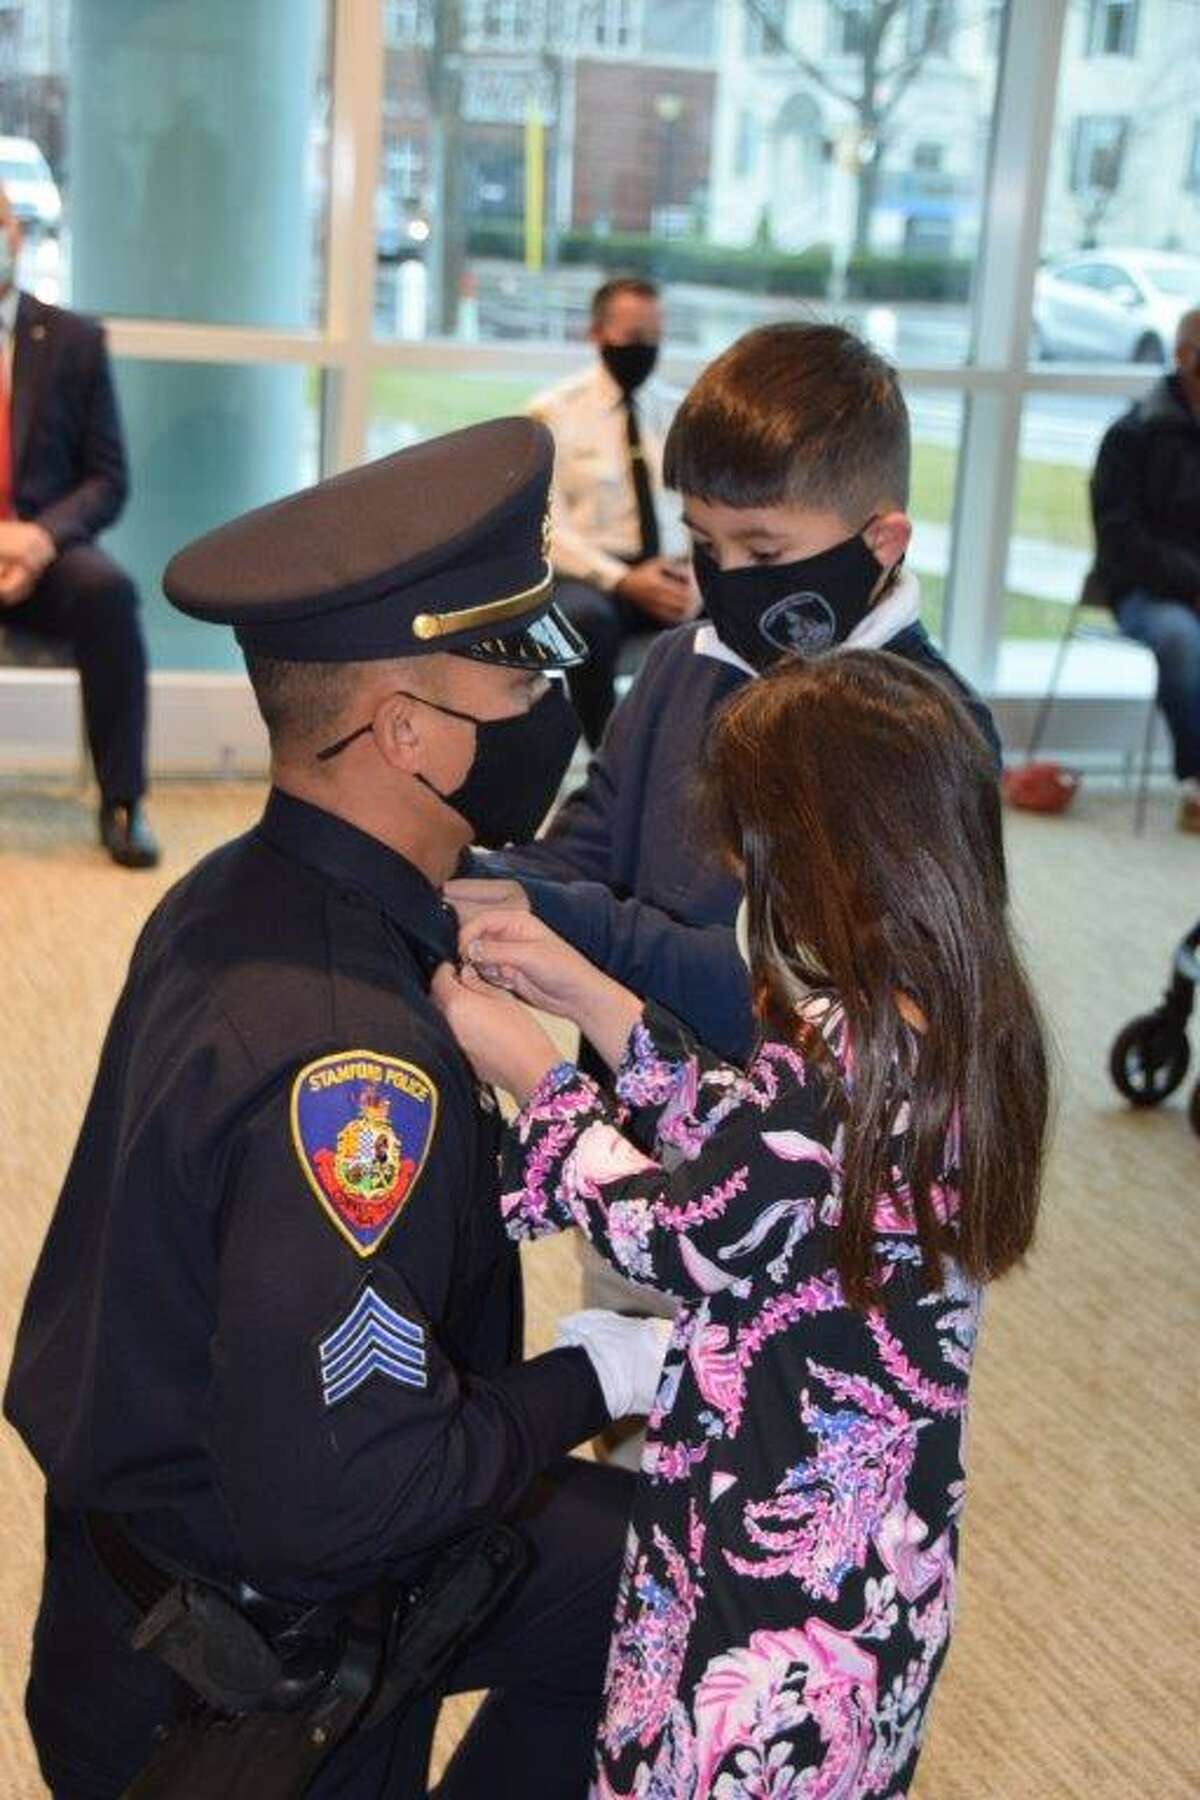 Newly minted Sgt. Michael Nguyen has his gold chevrons pinned to his collar by his son Michael Jr., 9, and daughter Kyla, 7, at a promotion ceremony held at Stamford police headquarters on Dec. 14, 2020. Felman-Merced, 32, a native of Beacon, N.Y., has been in the department for eight years. “It is a blessing. It’s almost a little surreal,” Felman-Merced said when asked how he felt about getting his stripes. “It is ... everything it represents and being able to do it. And the amount of time on and being a part of the units I have been a part of, it really is a blessing.”